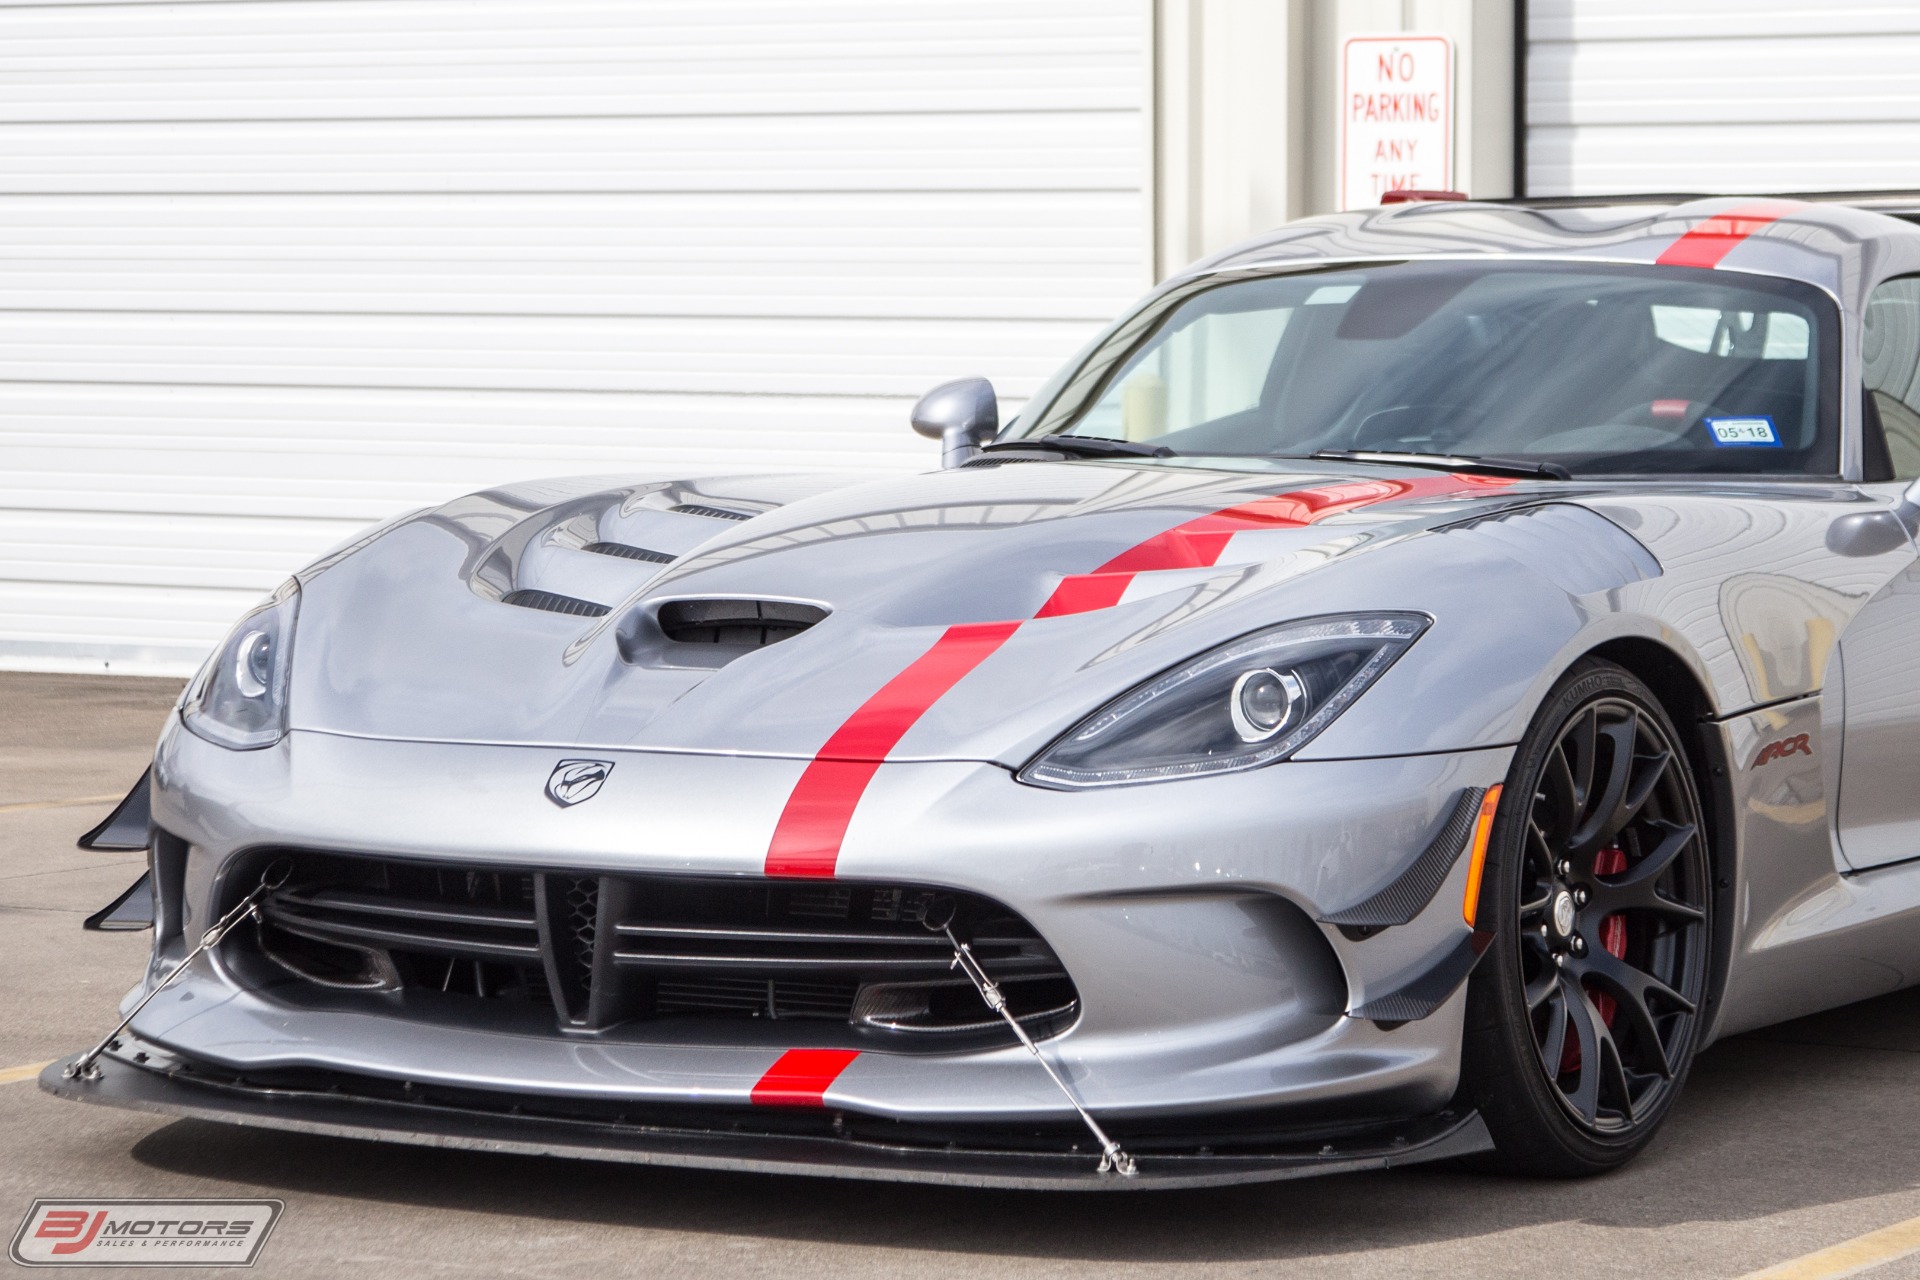 Used-2016-Dodge-Viper-ACR-Extreme-1-of-1